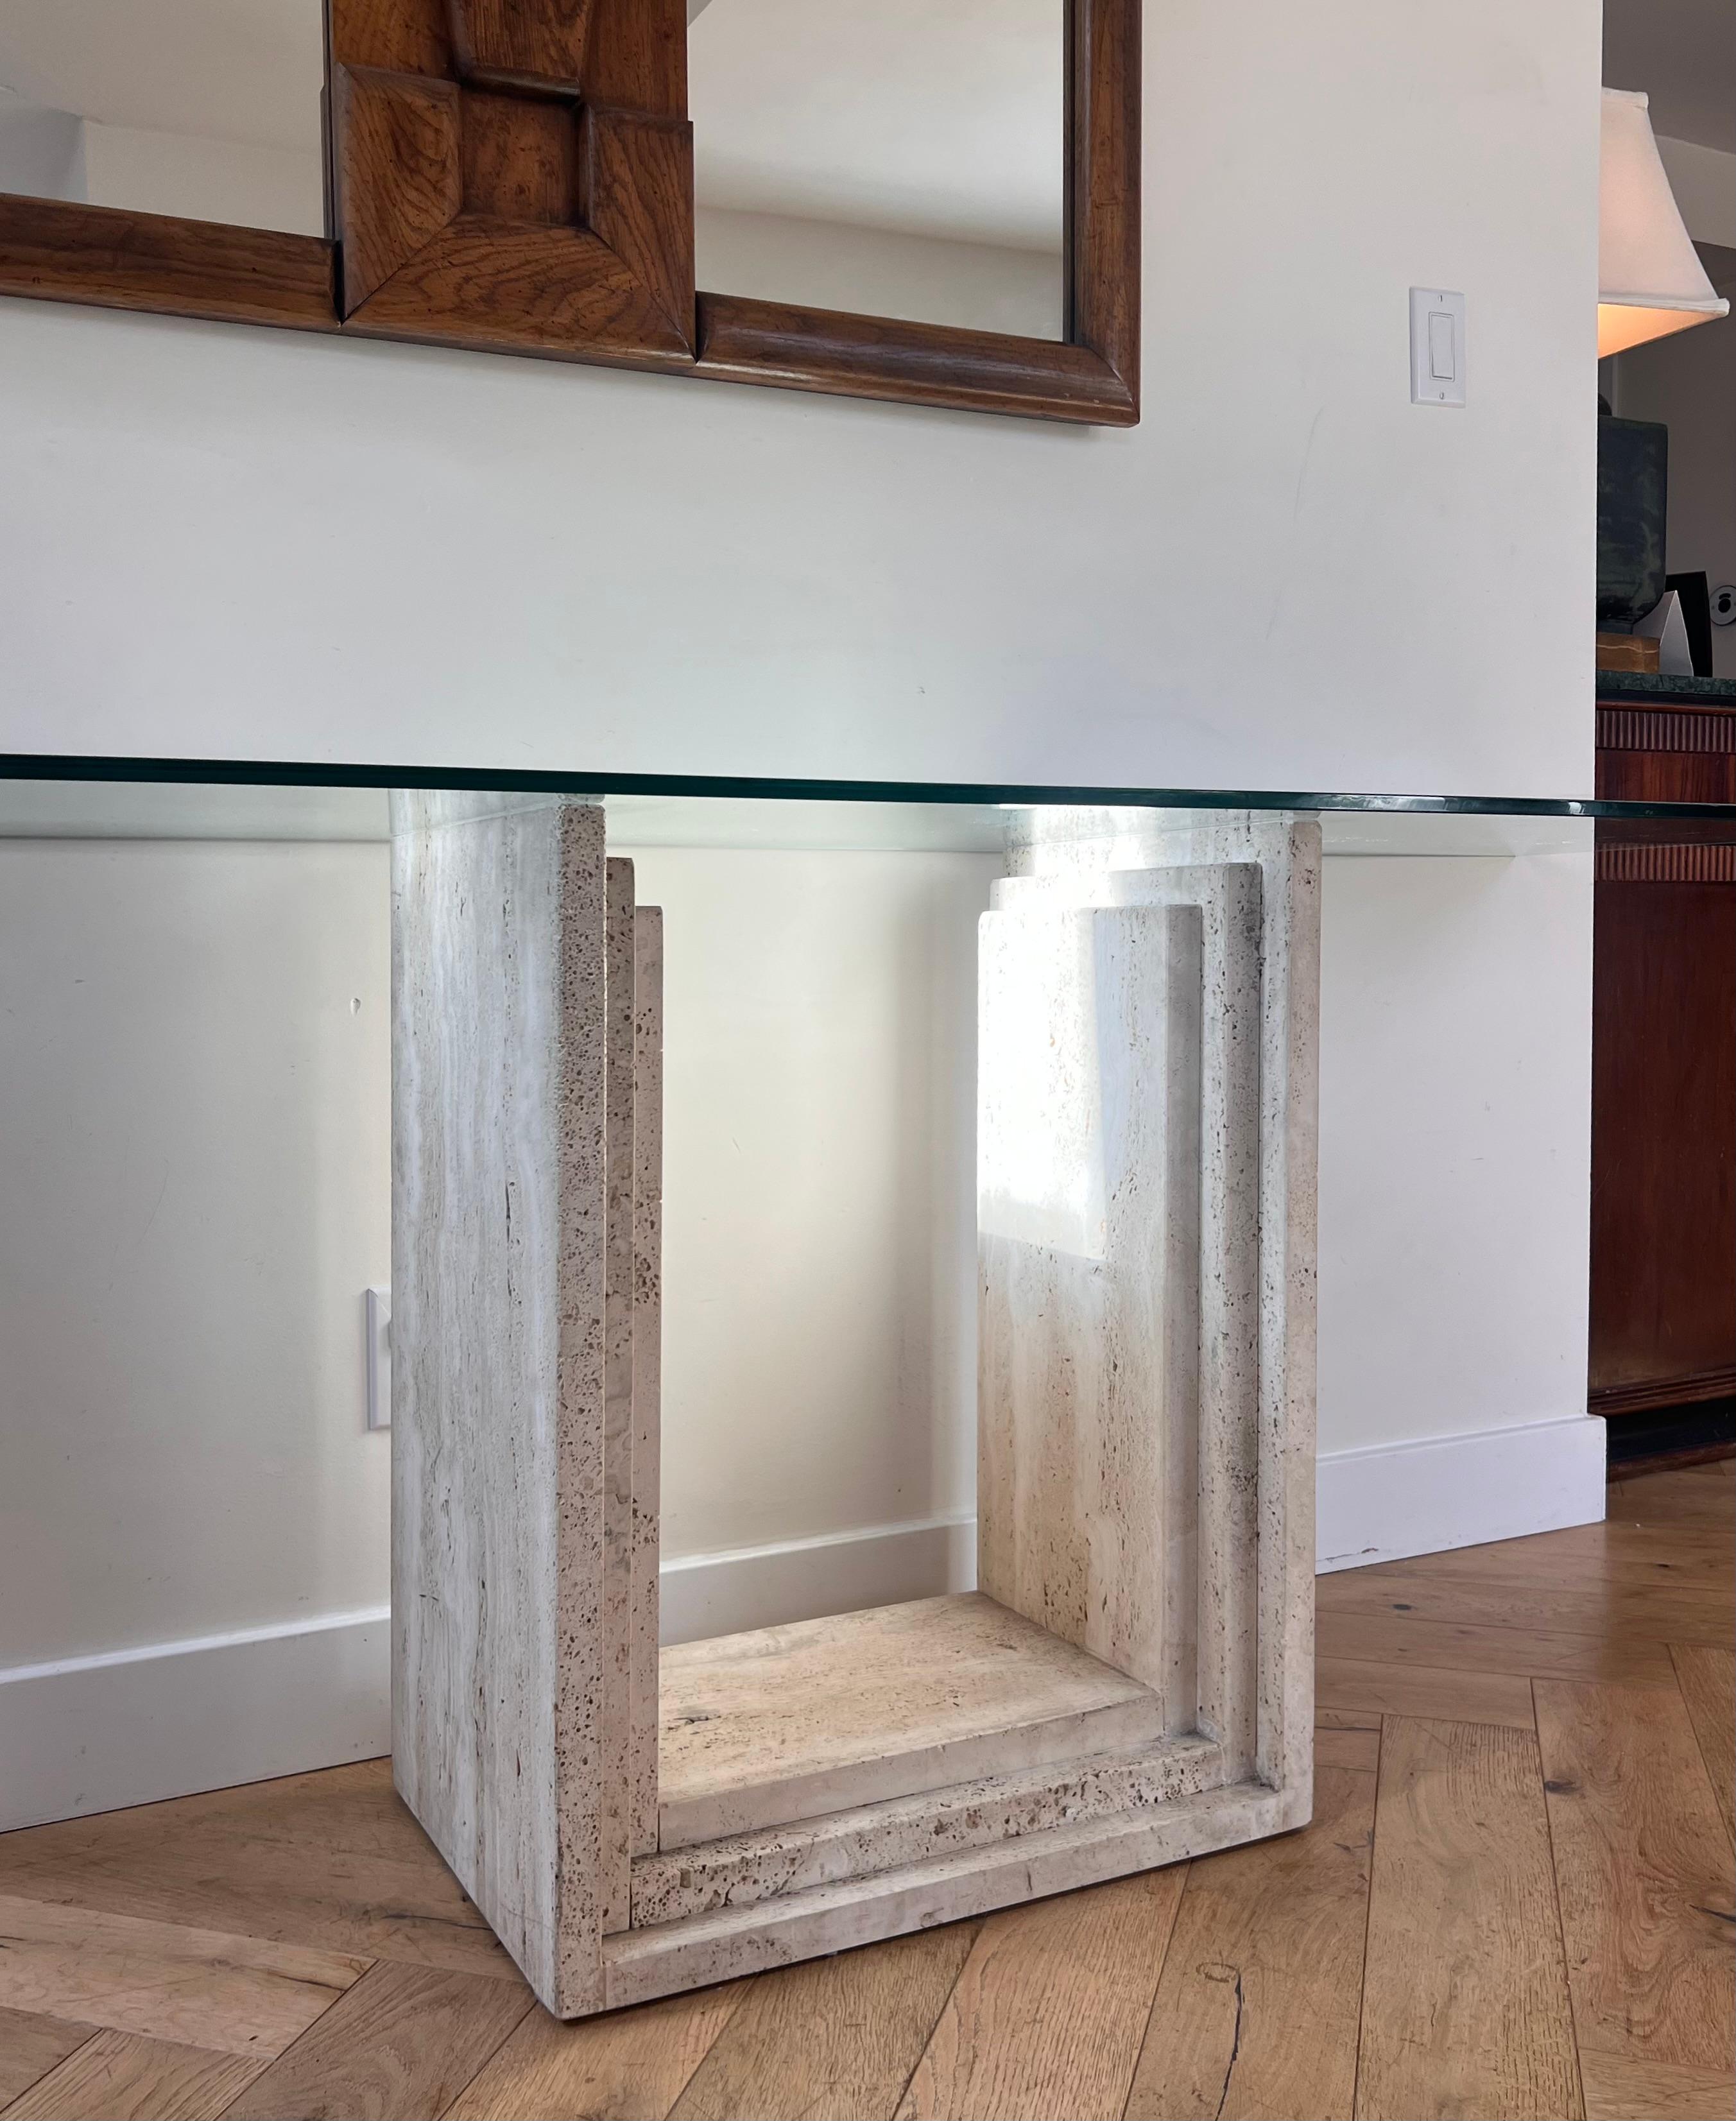 A monumental vintage Italian « Diapason » console table by Cattelan Italia, circa 1986. Featuring a solid travertine base graduated in the style of architect and designer Carlo Scarpa. The unbeveled glass top is original. An heirloom piece for the